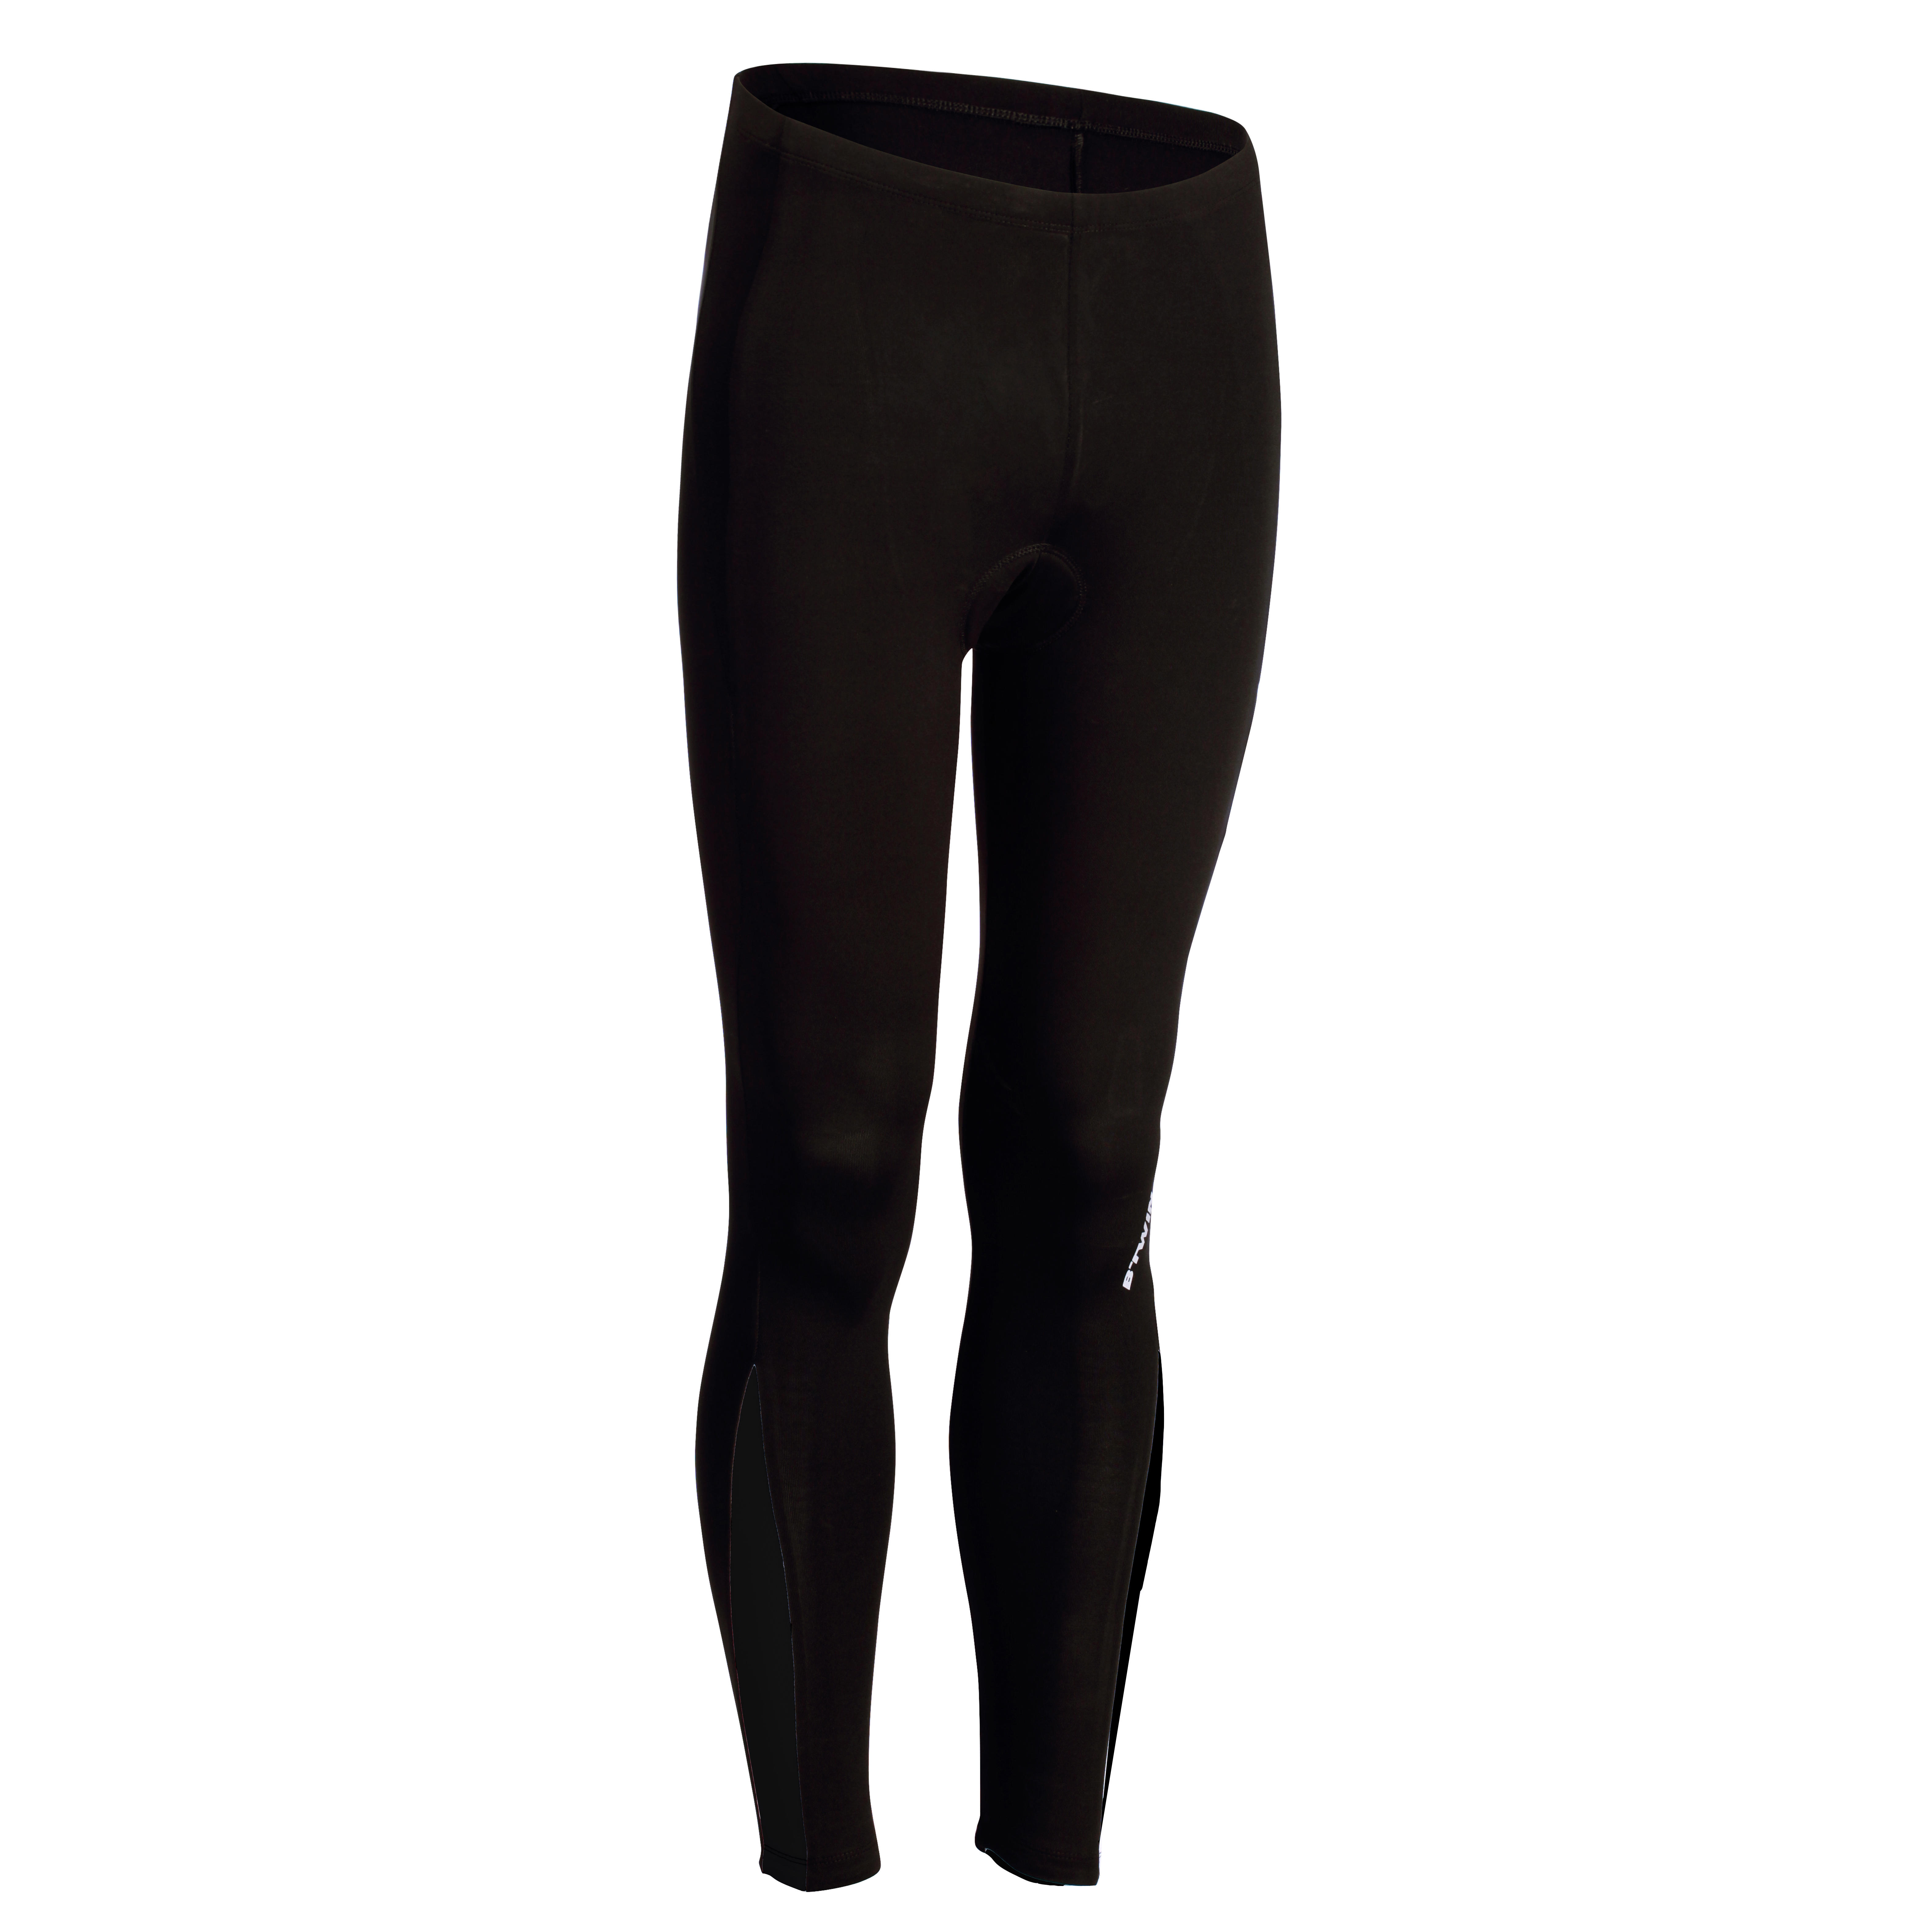 Buy 100 Road Cycling Tights - Black Online